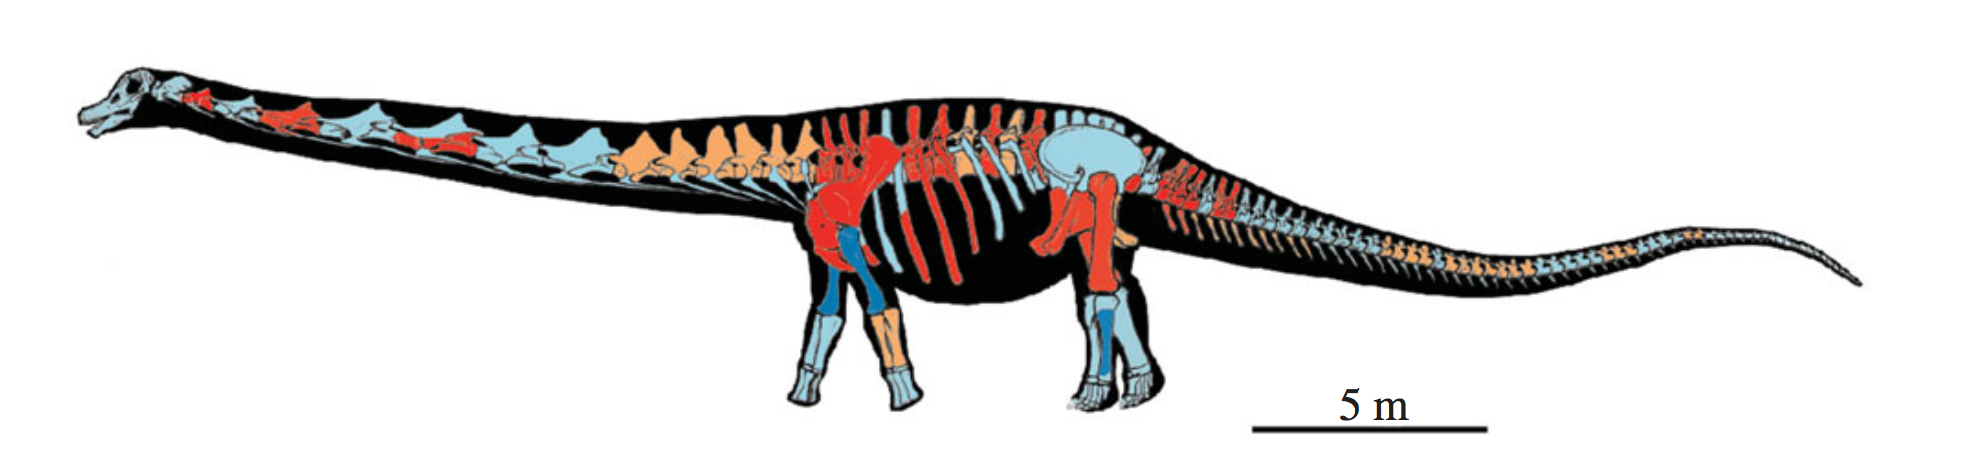 Newly Named Titanosaur Was The Largest Land Animal Our Planet Has Ever Seen